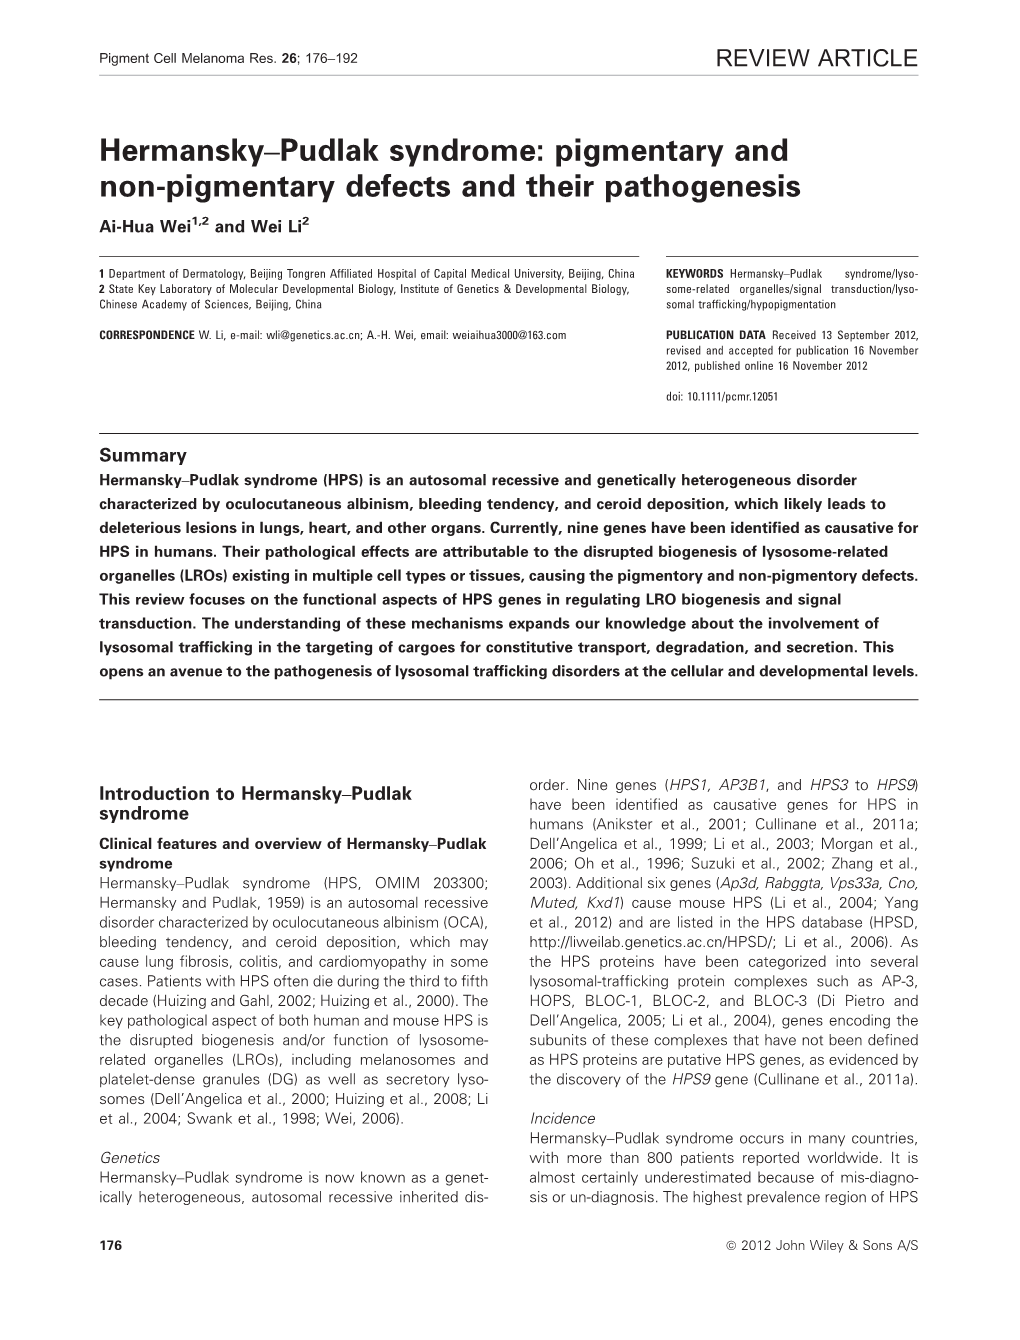 Pigmentary and Nonpigmentary Defects and Their Pathogenesis